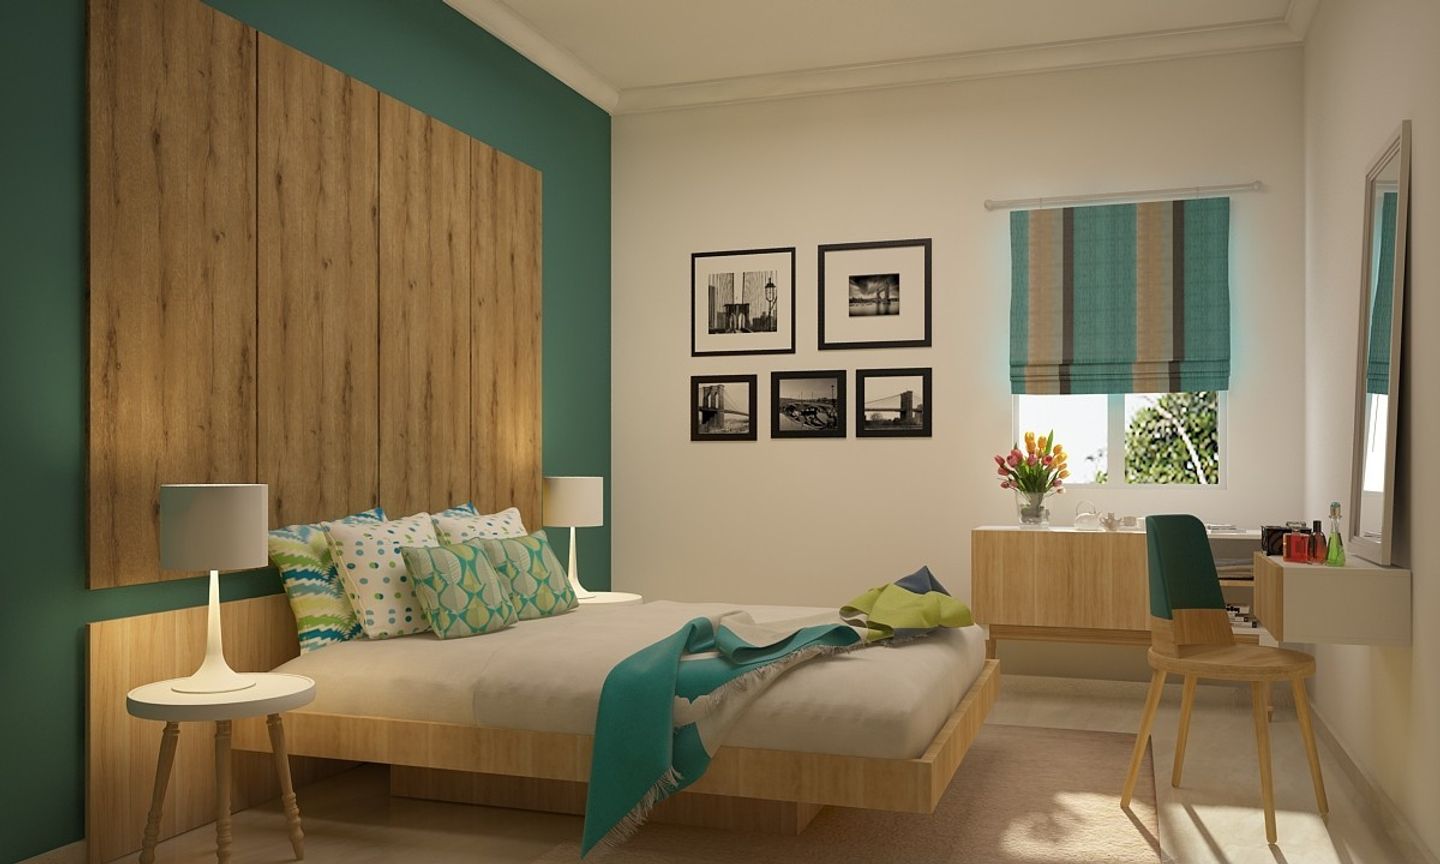 Modern Guest Bedroom Design With Teal Green And White Interiors